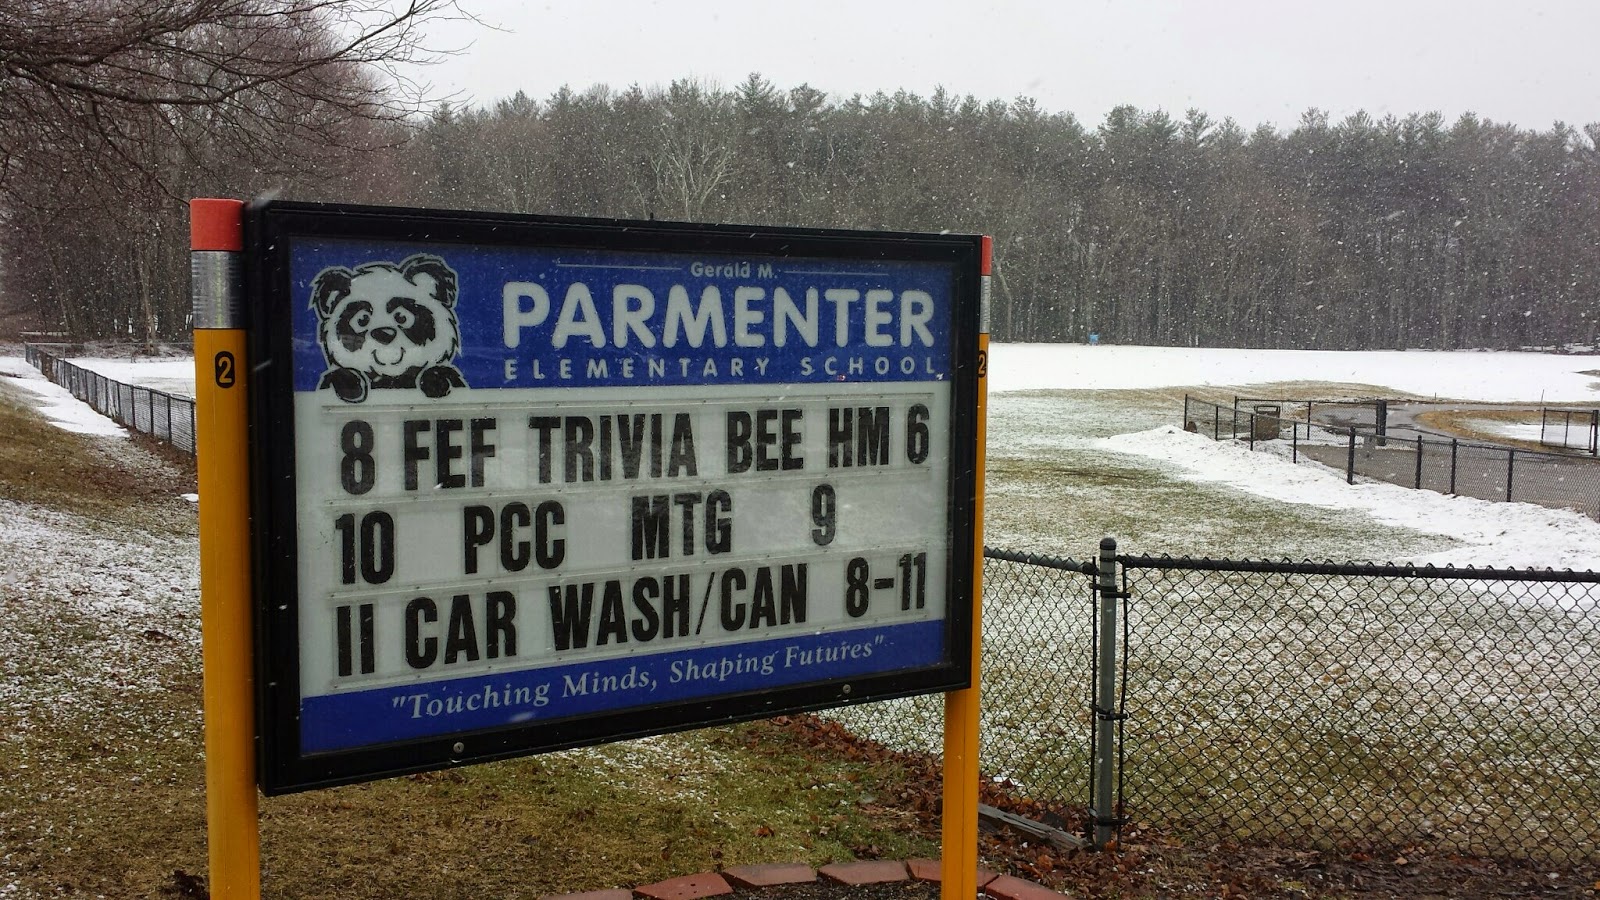 The FEF Trivia Bee is scheduled for April 8